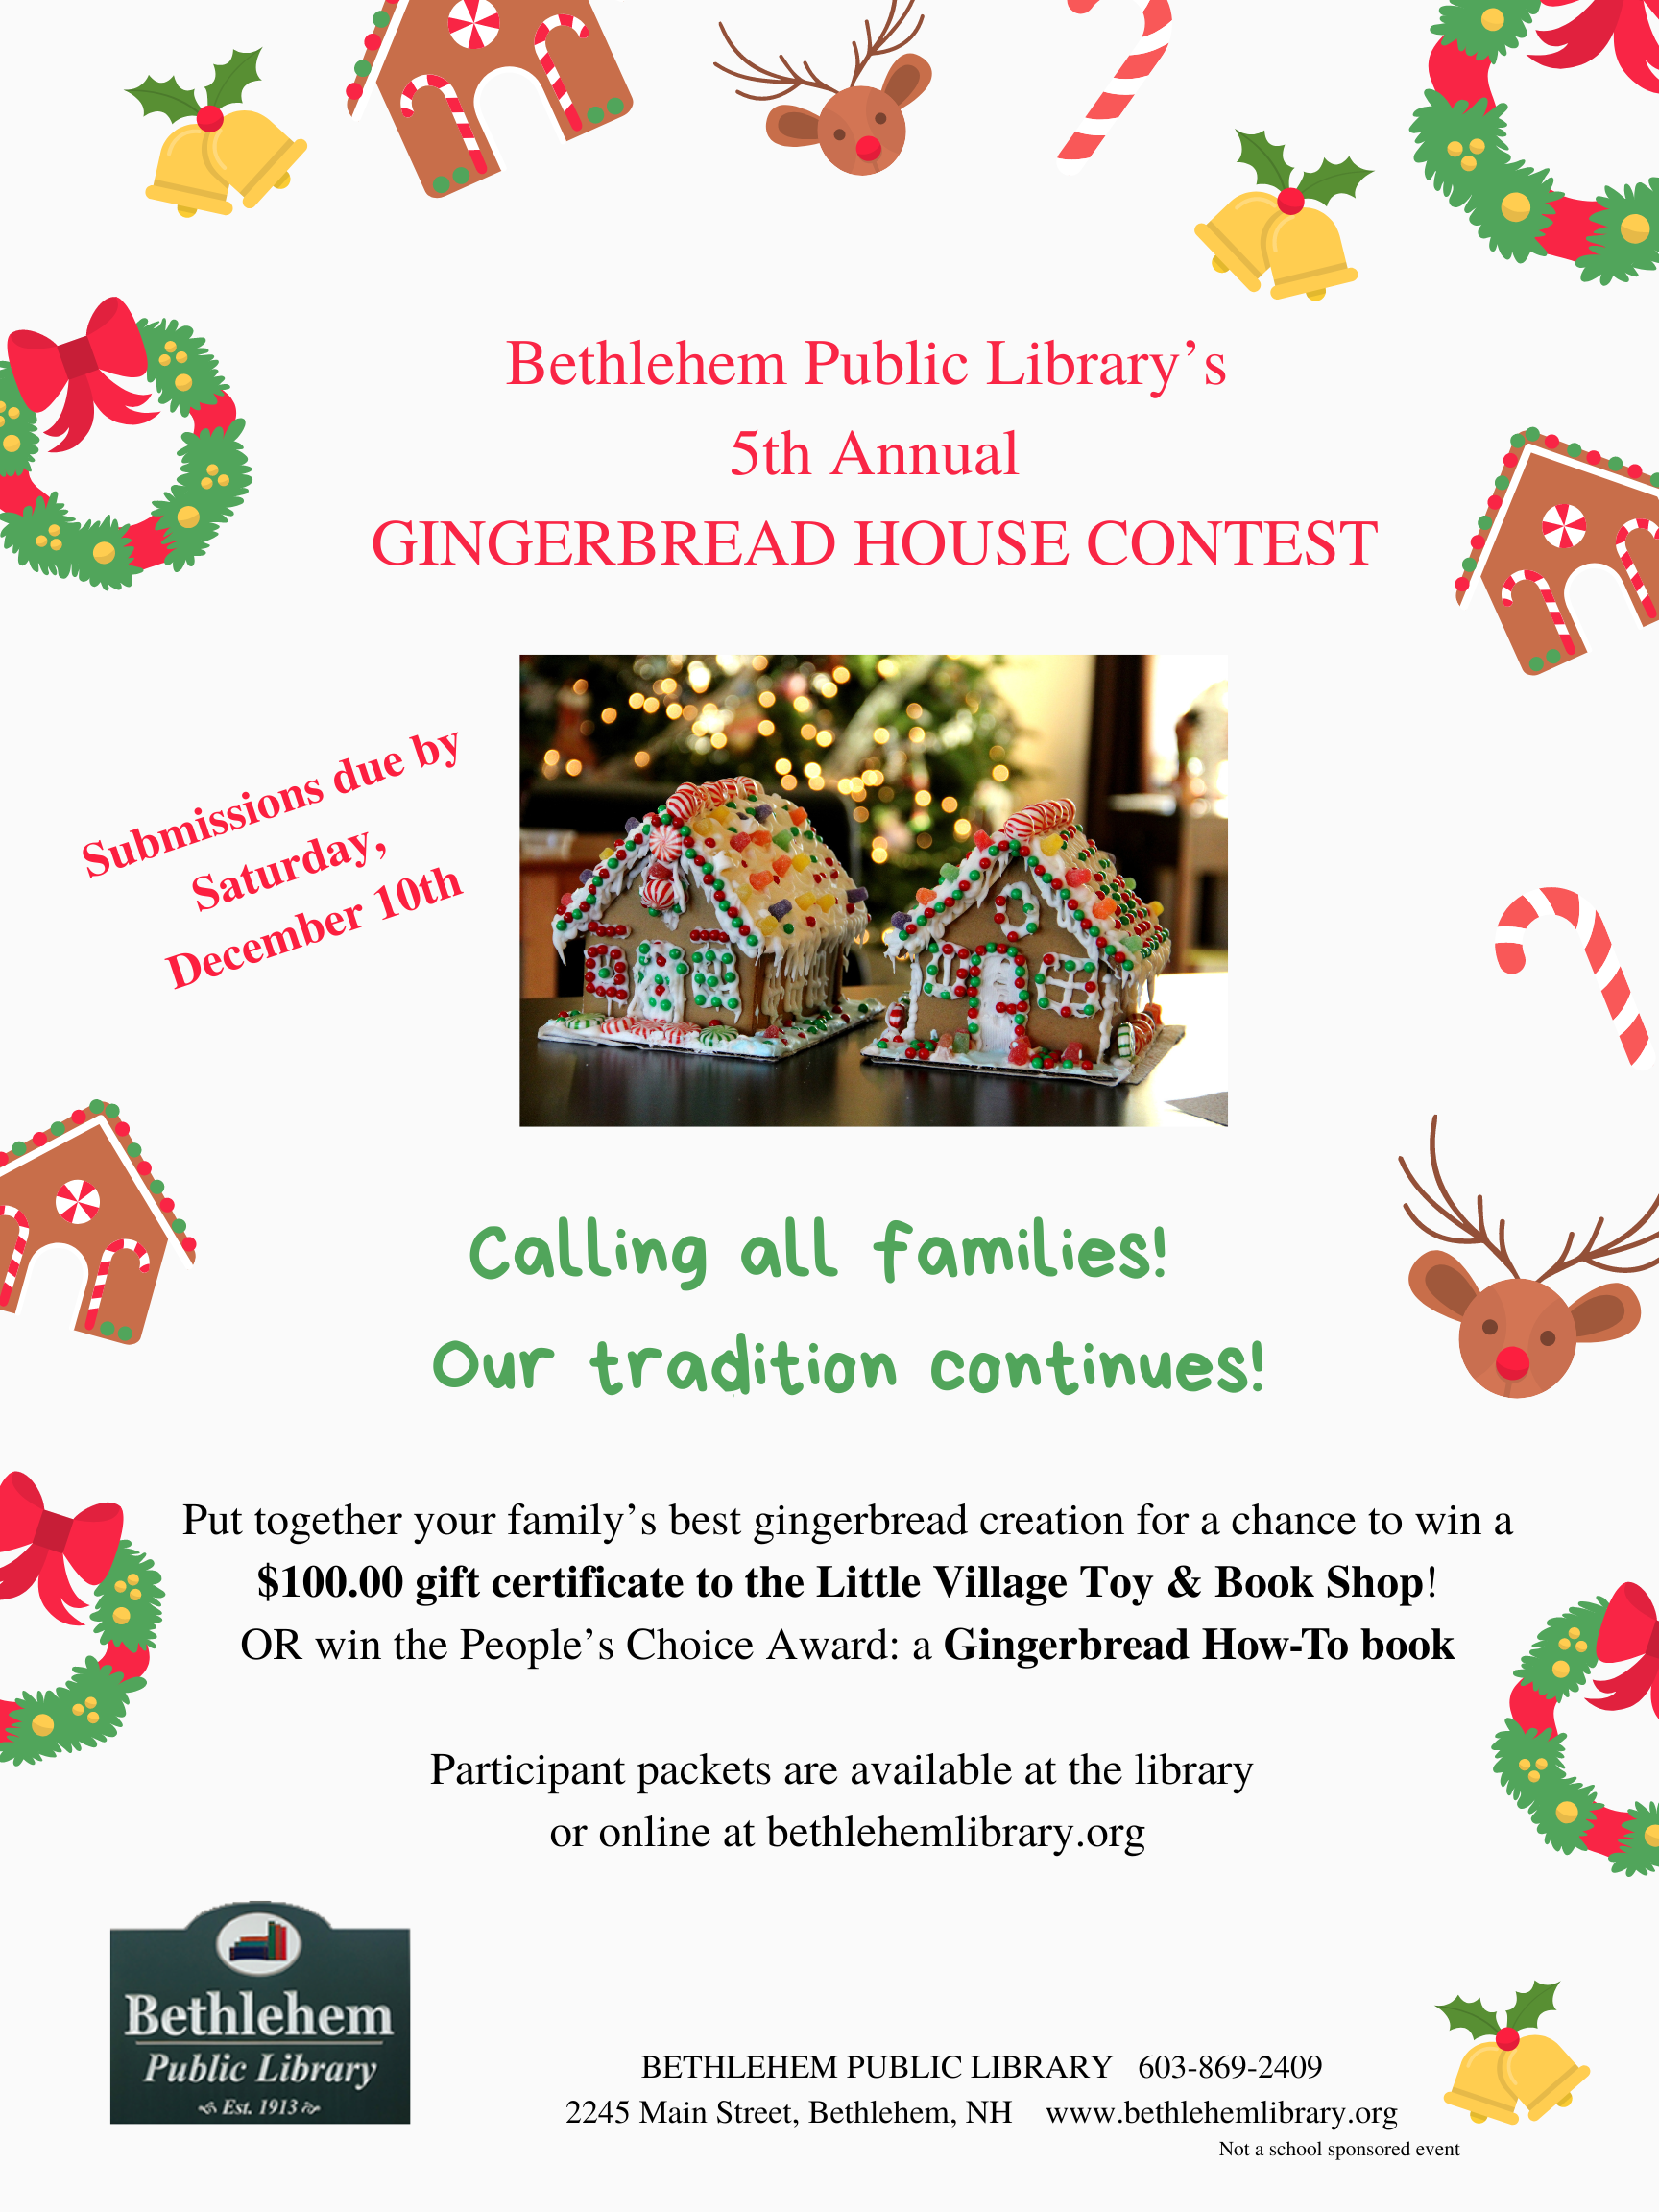 Gingerbread House contest flyer